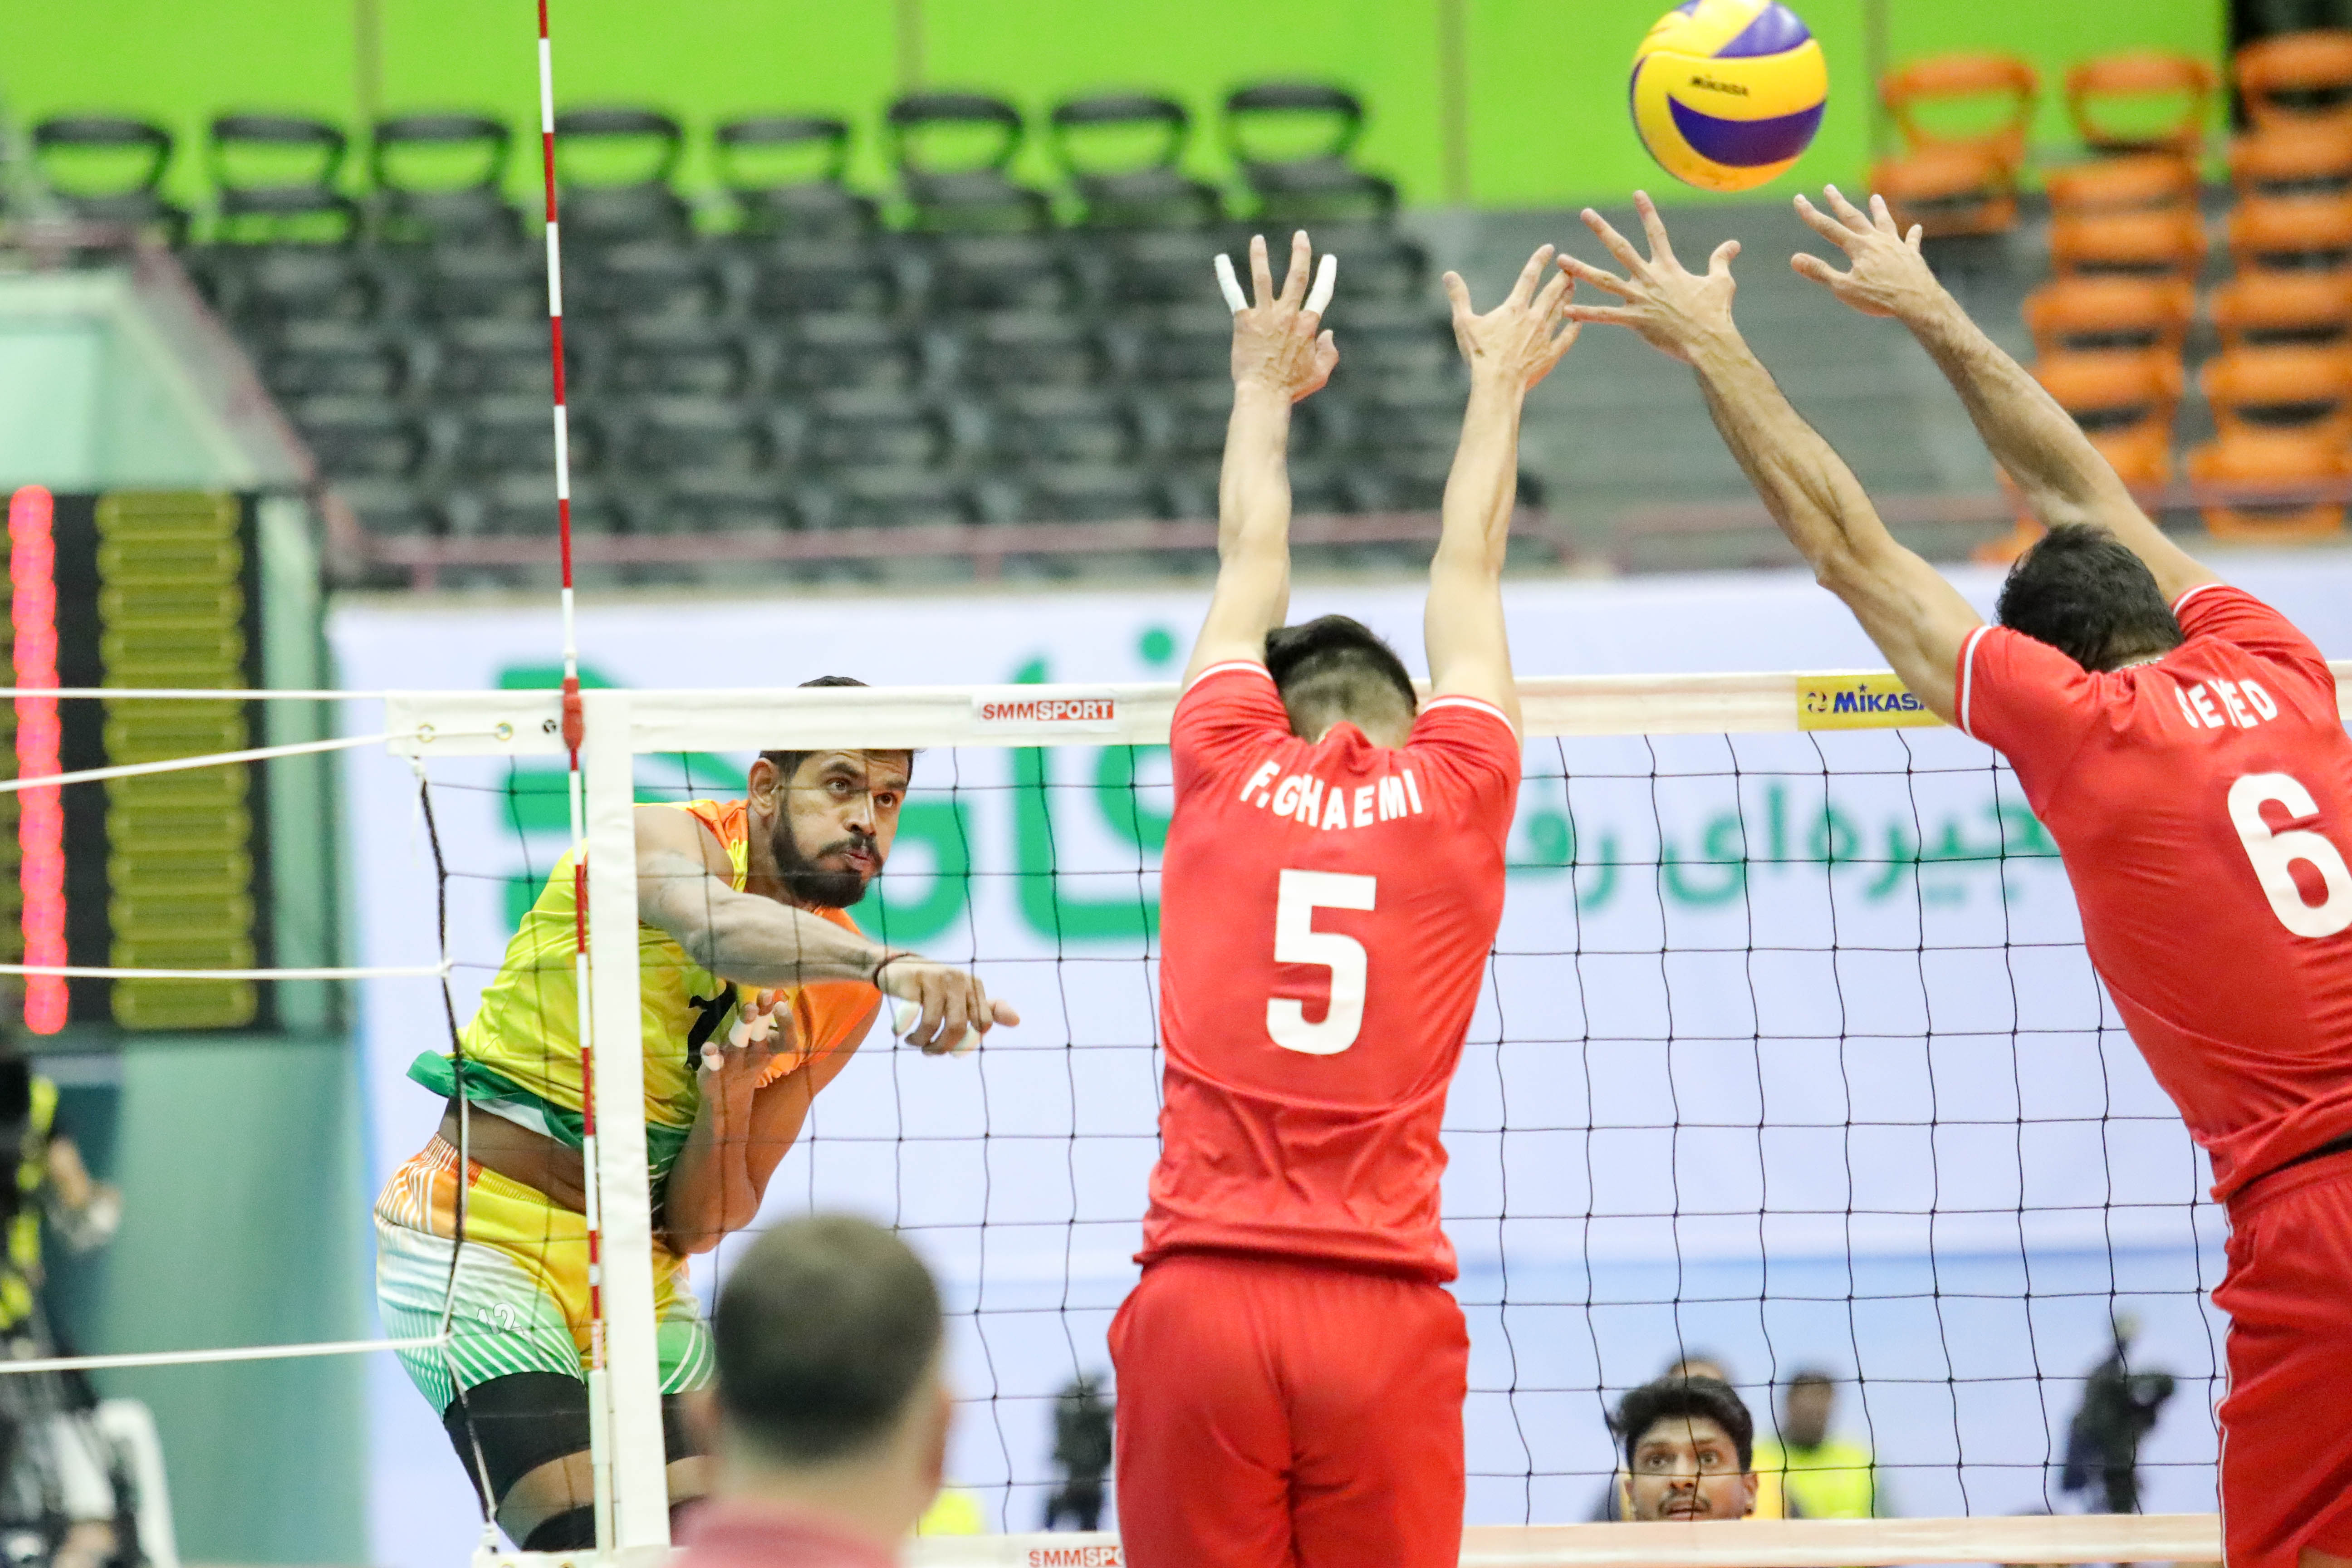 IRAN WIN TOP 8 PLAYOFF MATCH WITH 3-0 DEMOLITION OF INDIA - Asian ...